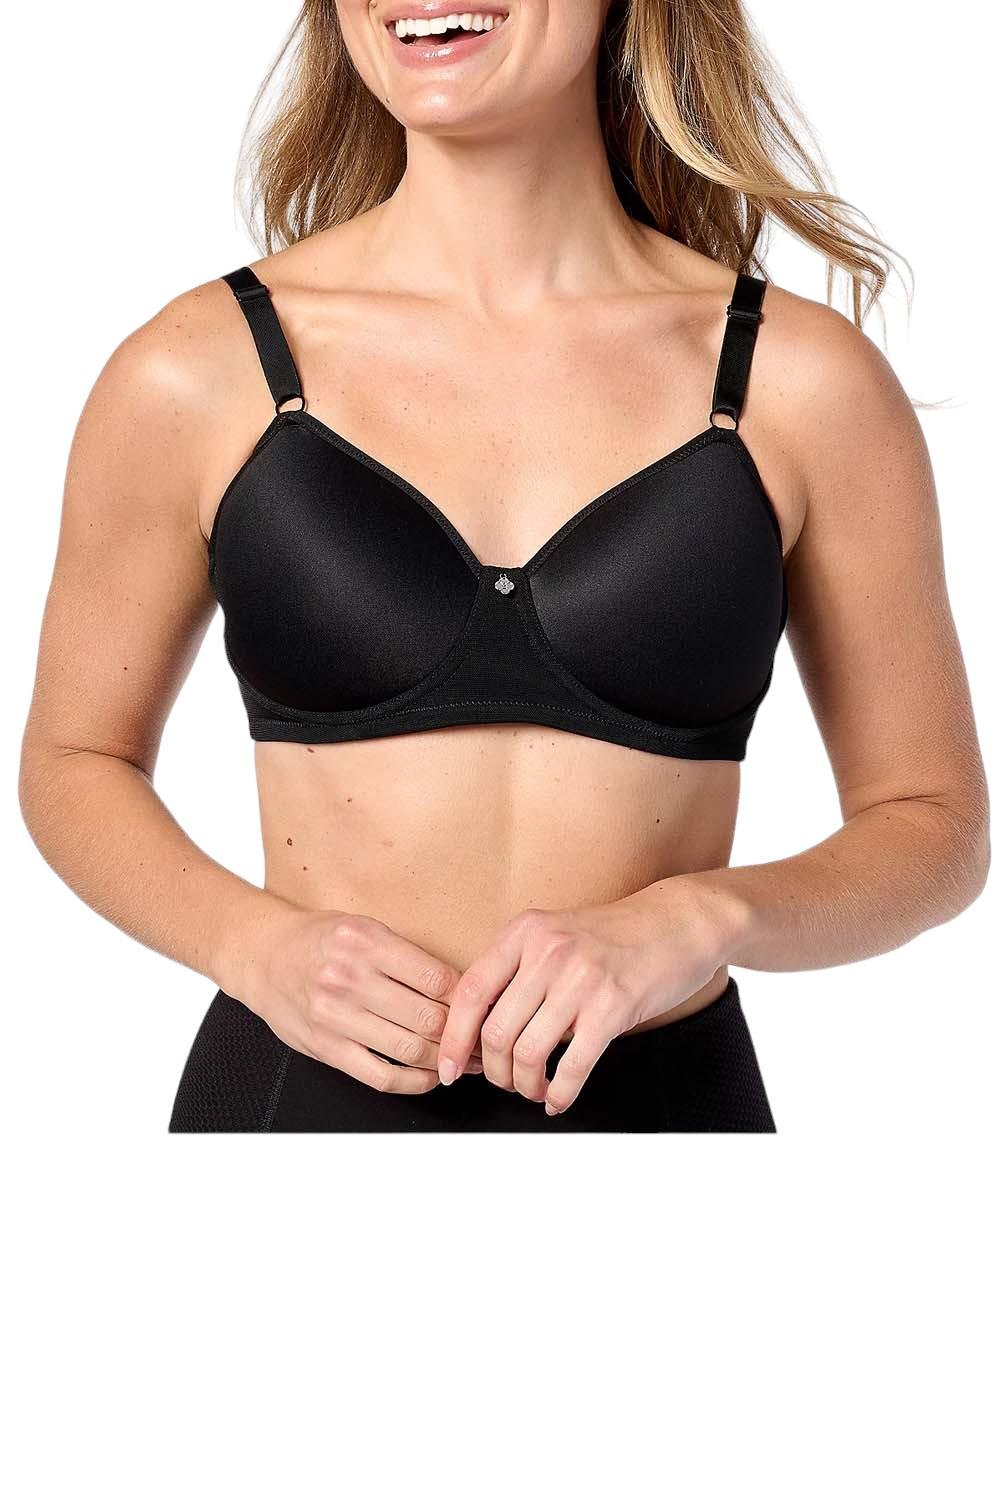 Jockey Forever Fit Molded Cup Active Lifestyle Bra ROSE PETAL 2X